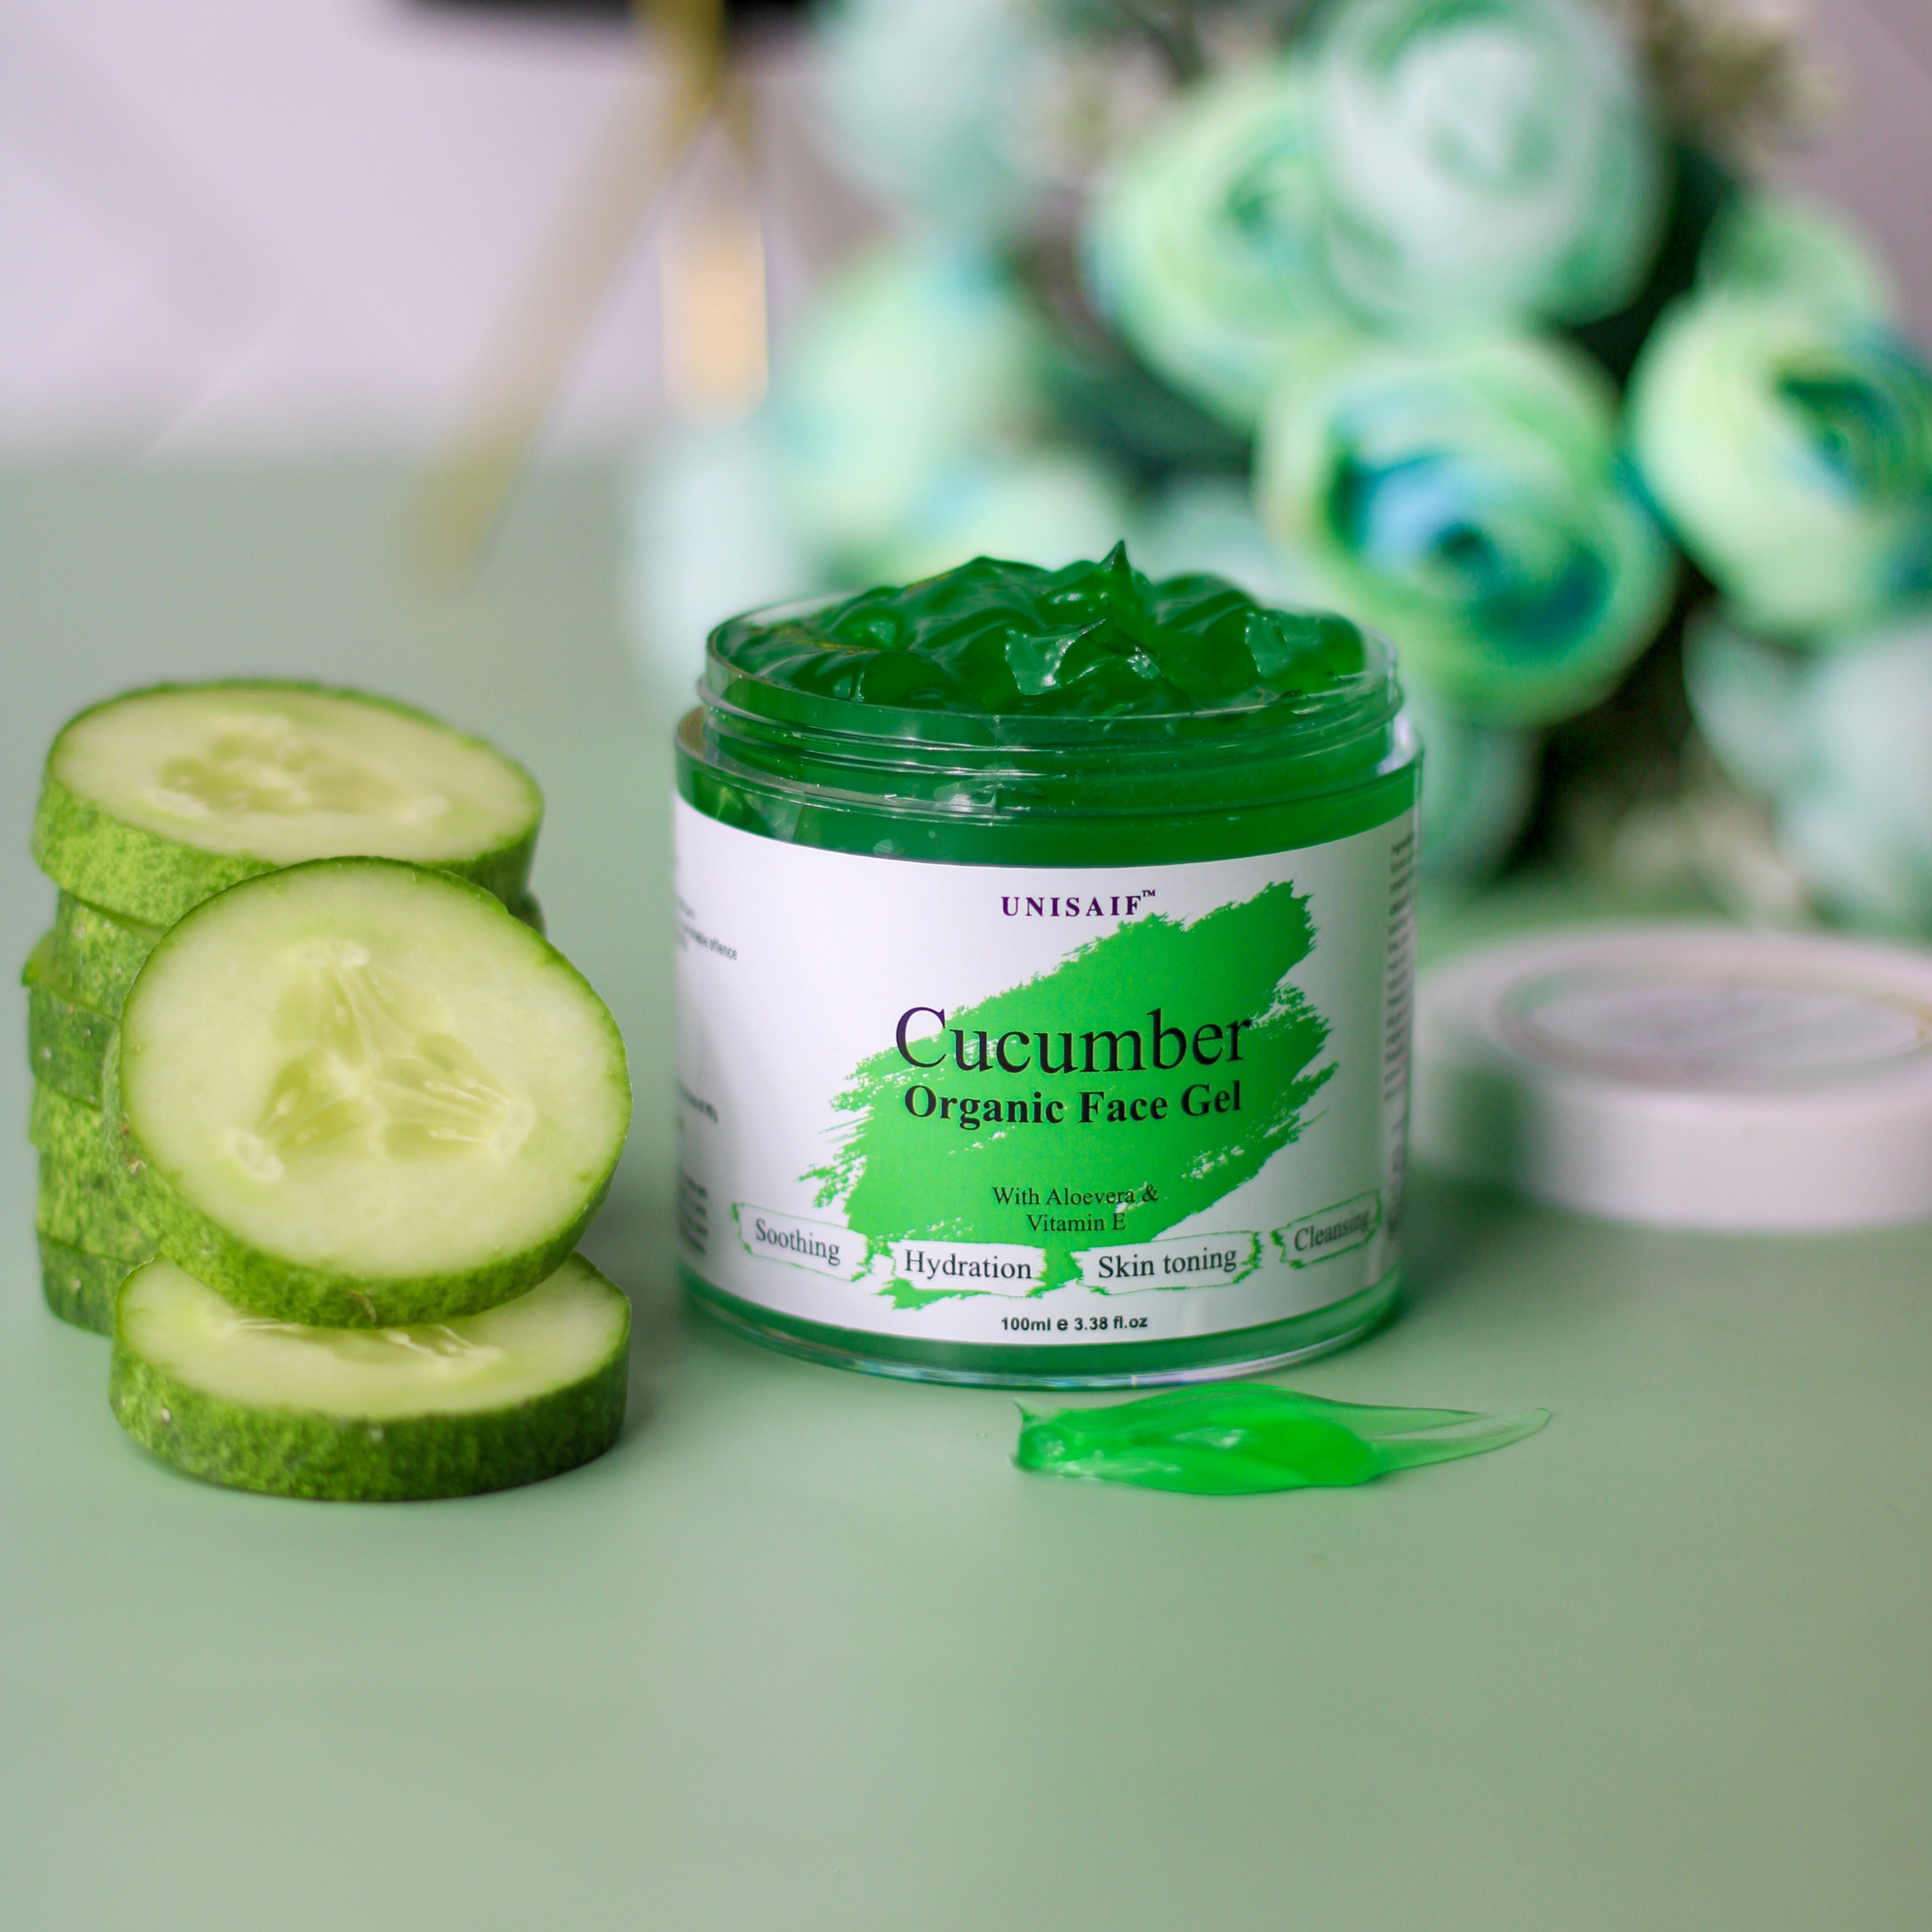 Cucumber Organic Facial Gel (100g) With Vitamin E| Acne prevention| Hydrating| Skin Toning| Cleansing| NO PARABEN